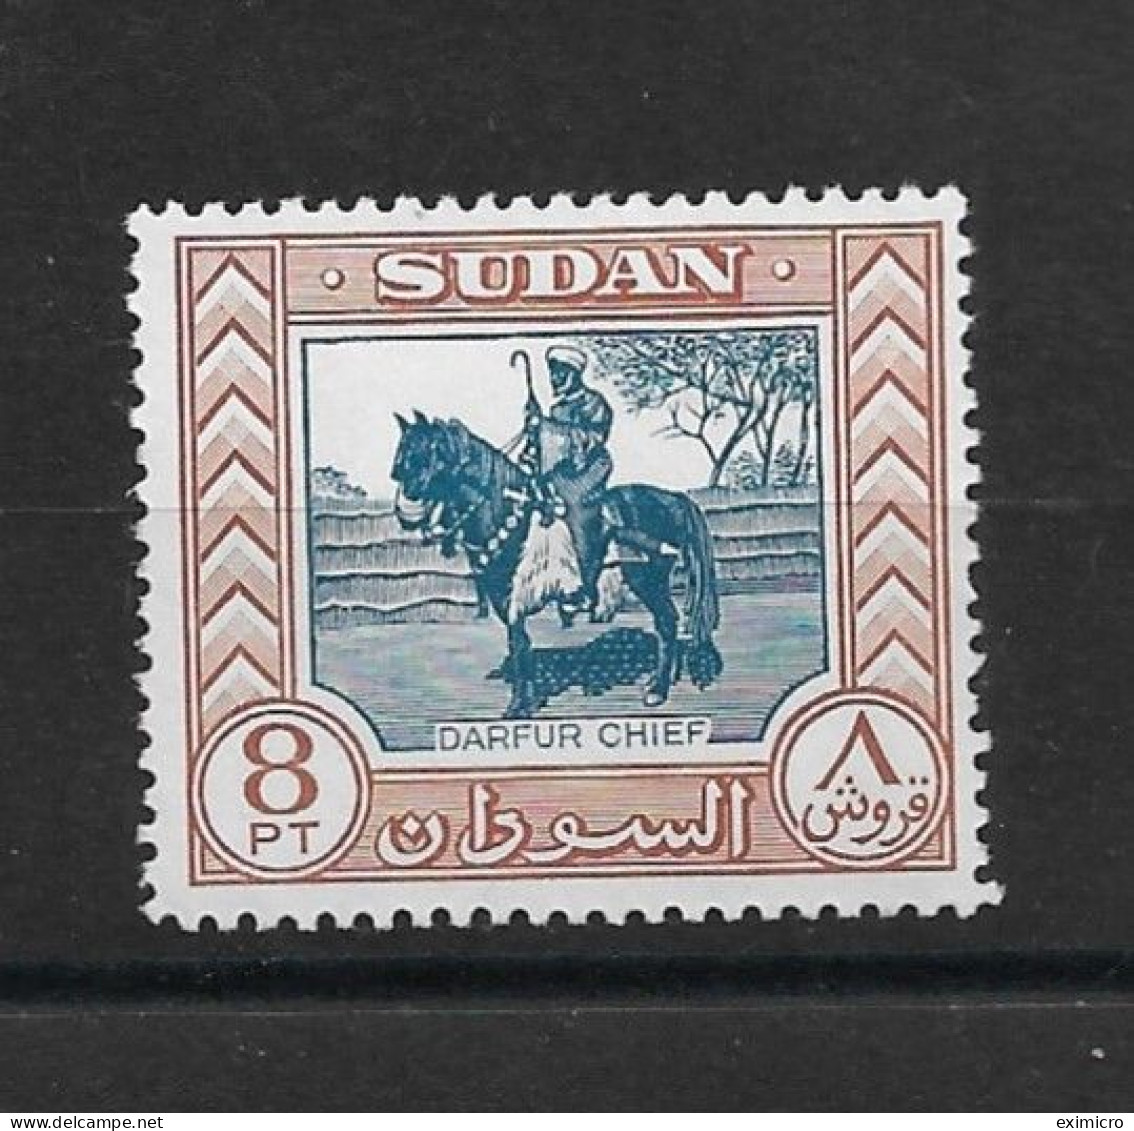 SUDAN 1951 - 1961 8p  SG 136a DEEP BLUE AND BROWN  UNMOUNTED MINT Cat £21 - Soudan (...-1951)